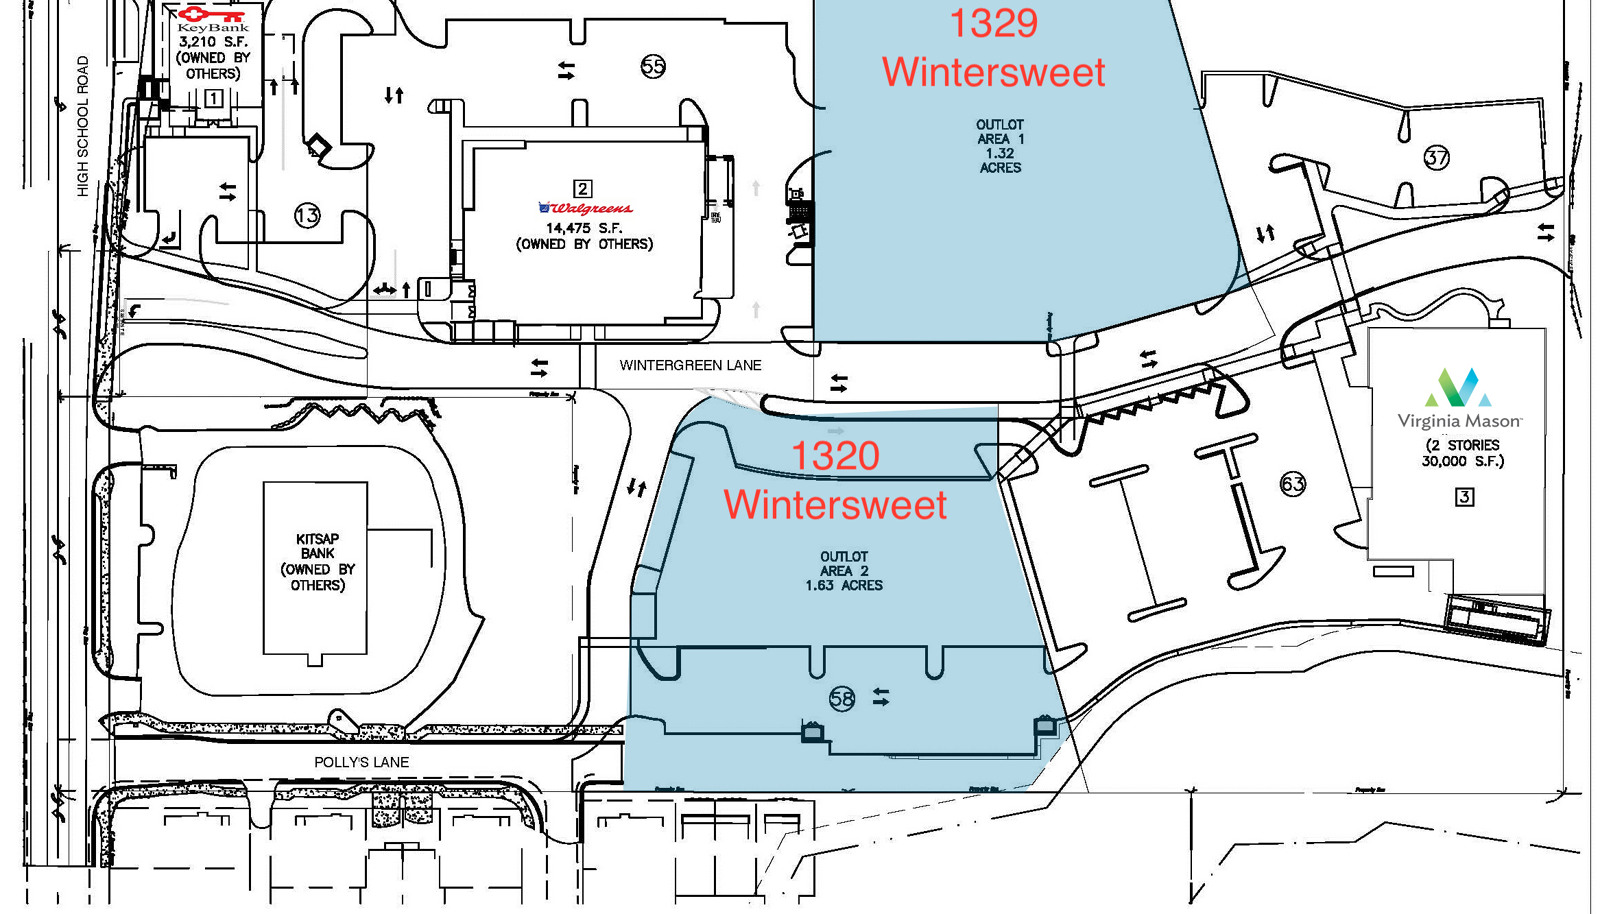 Site Plan Annotated